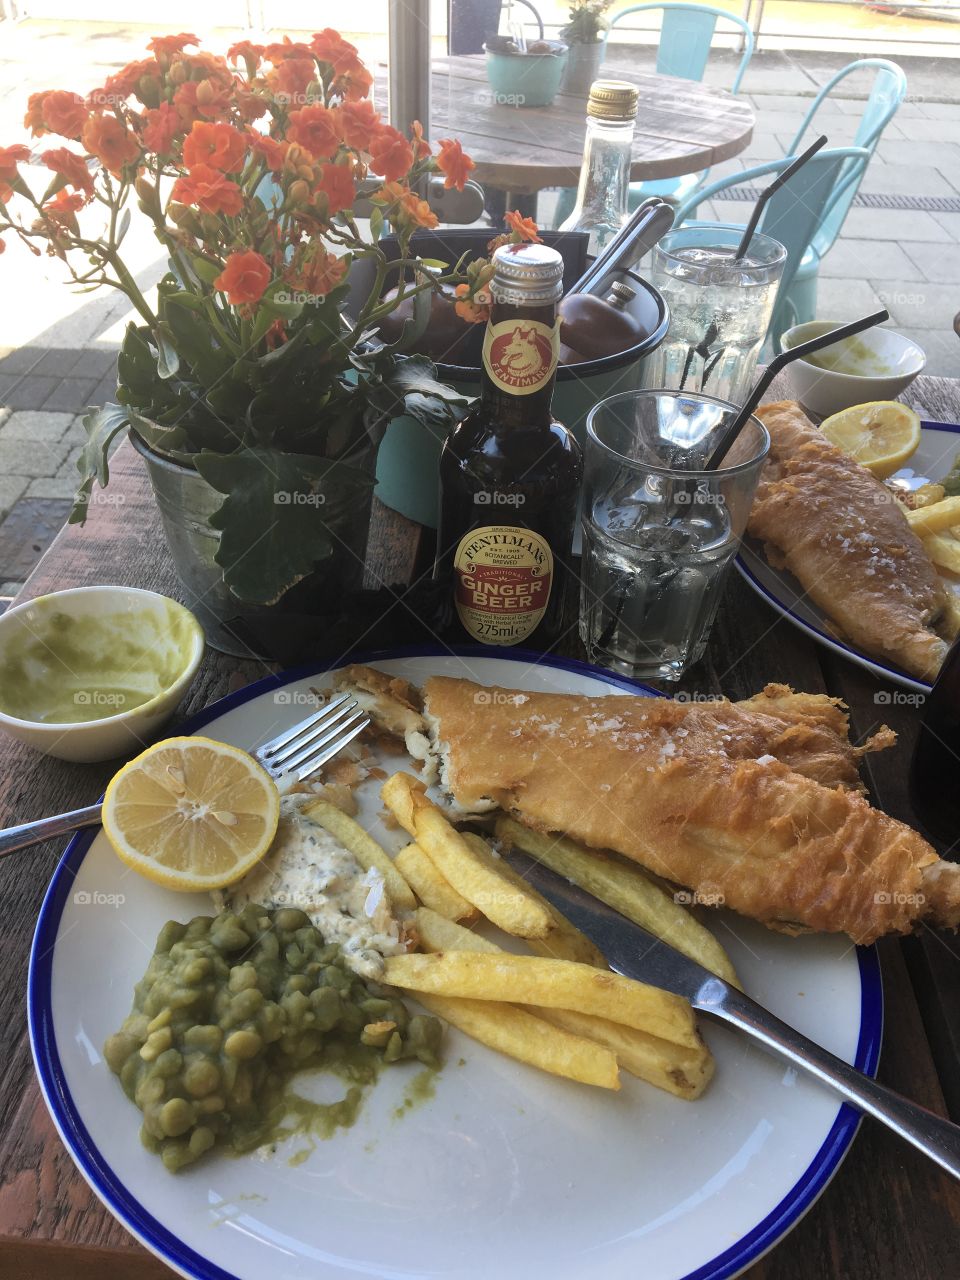 Fish and chips by the river bank